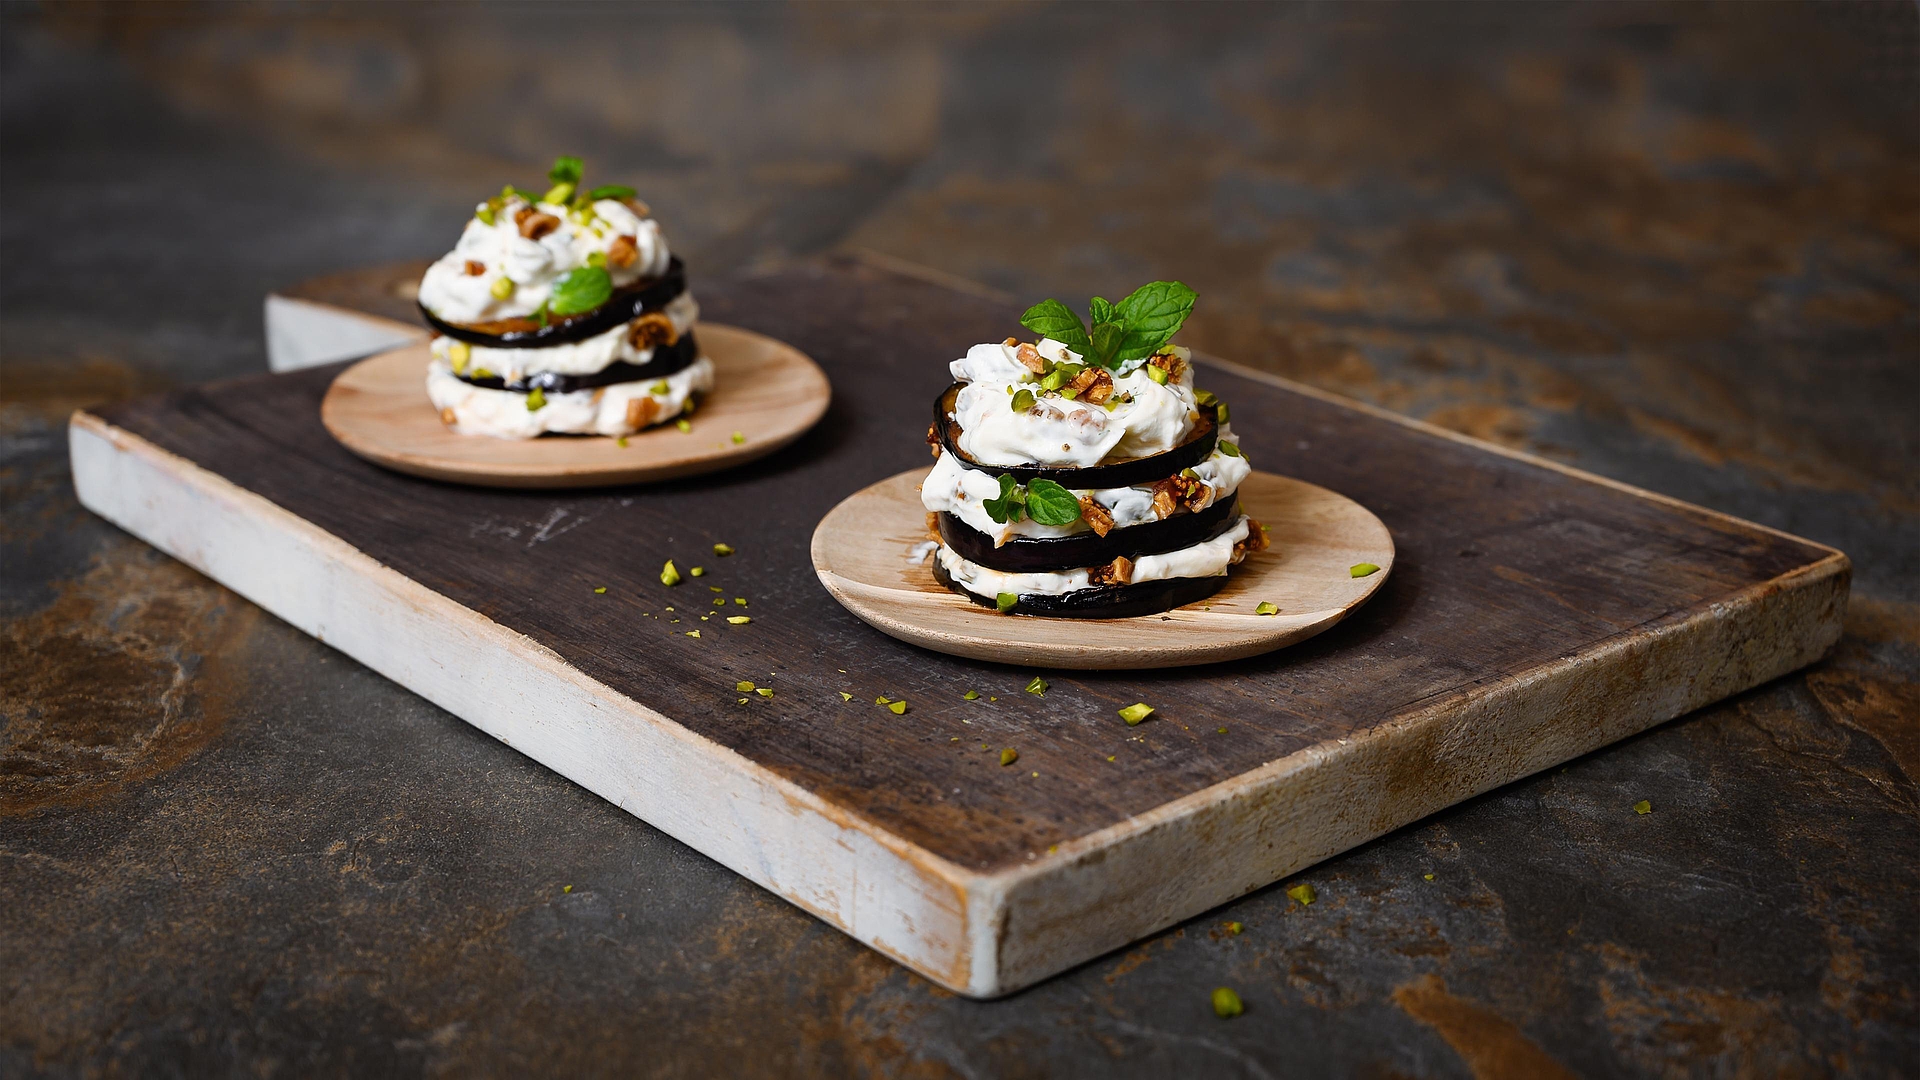 Aubergine towers with goat's cheese, pistachios, mint and dried figs